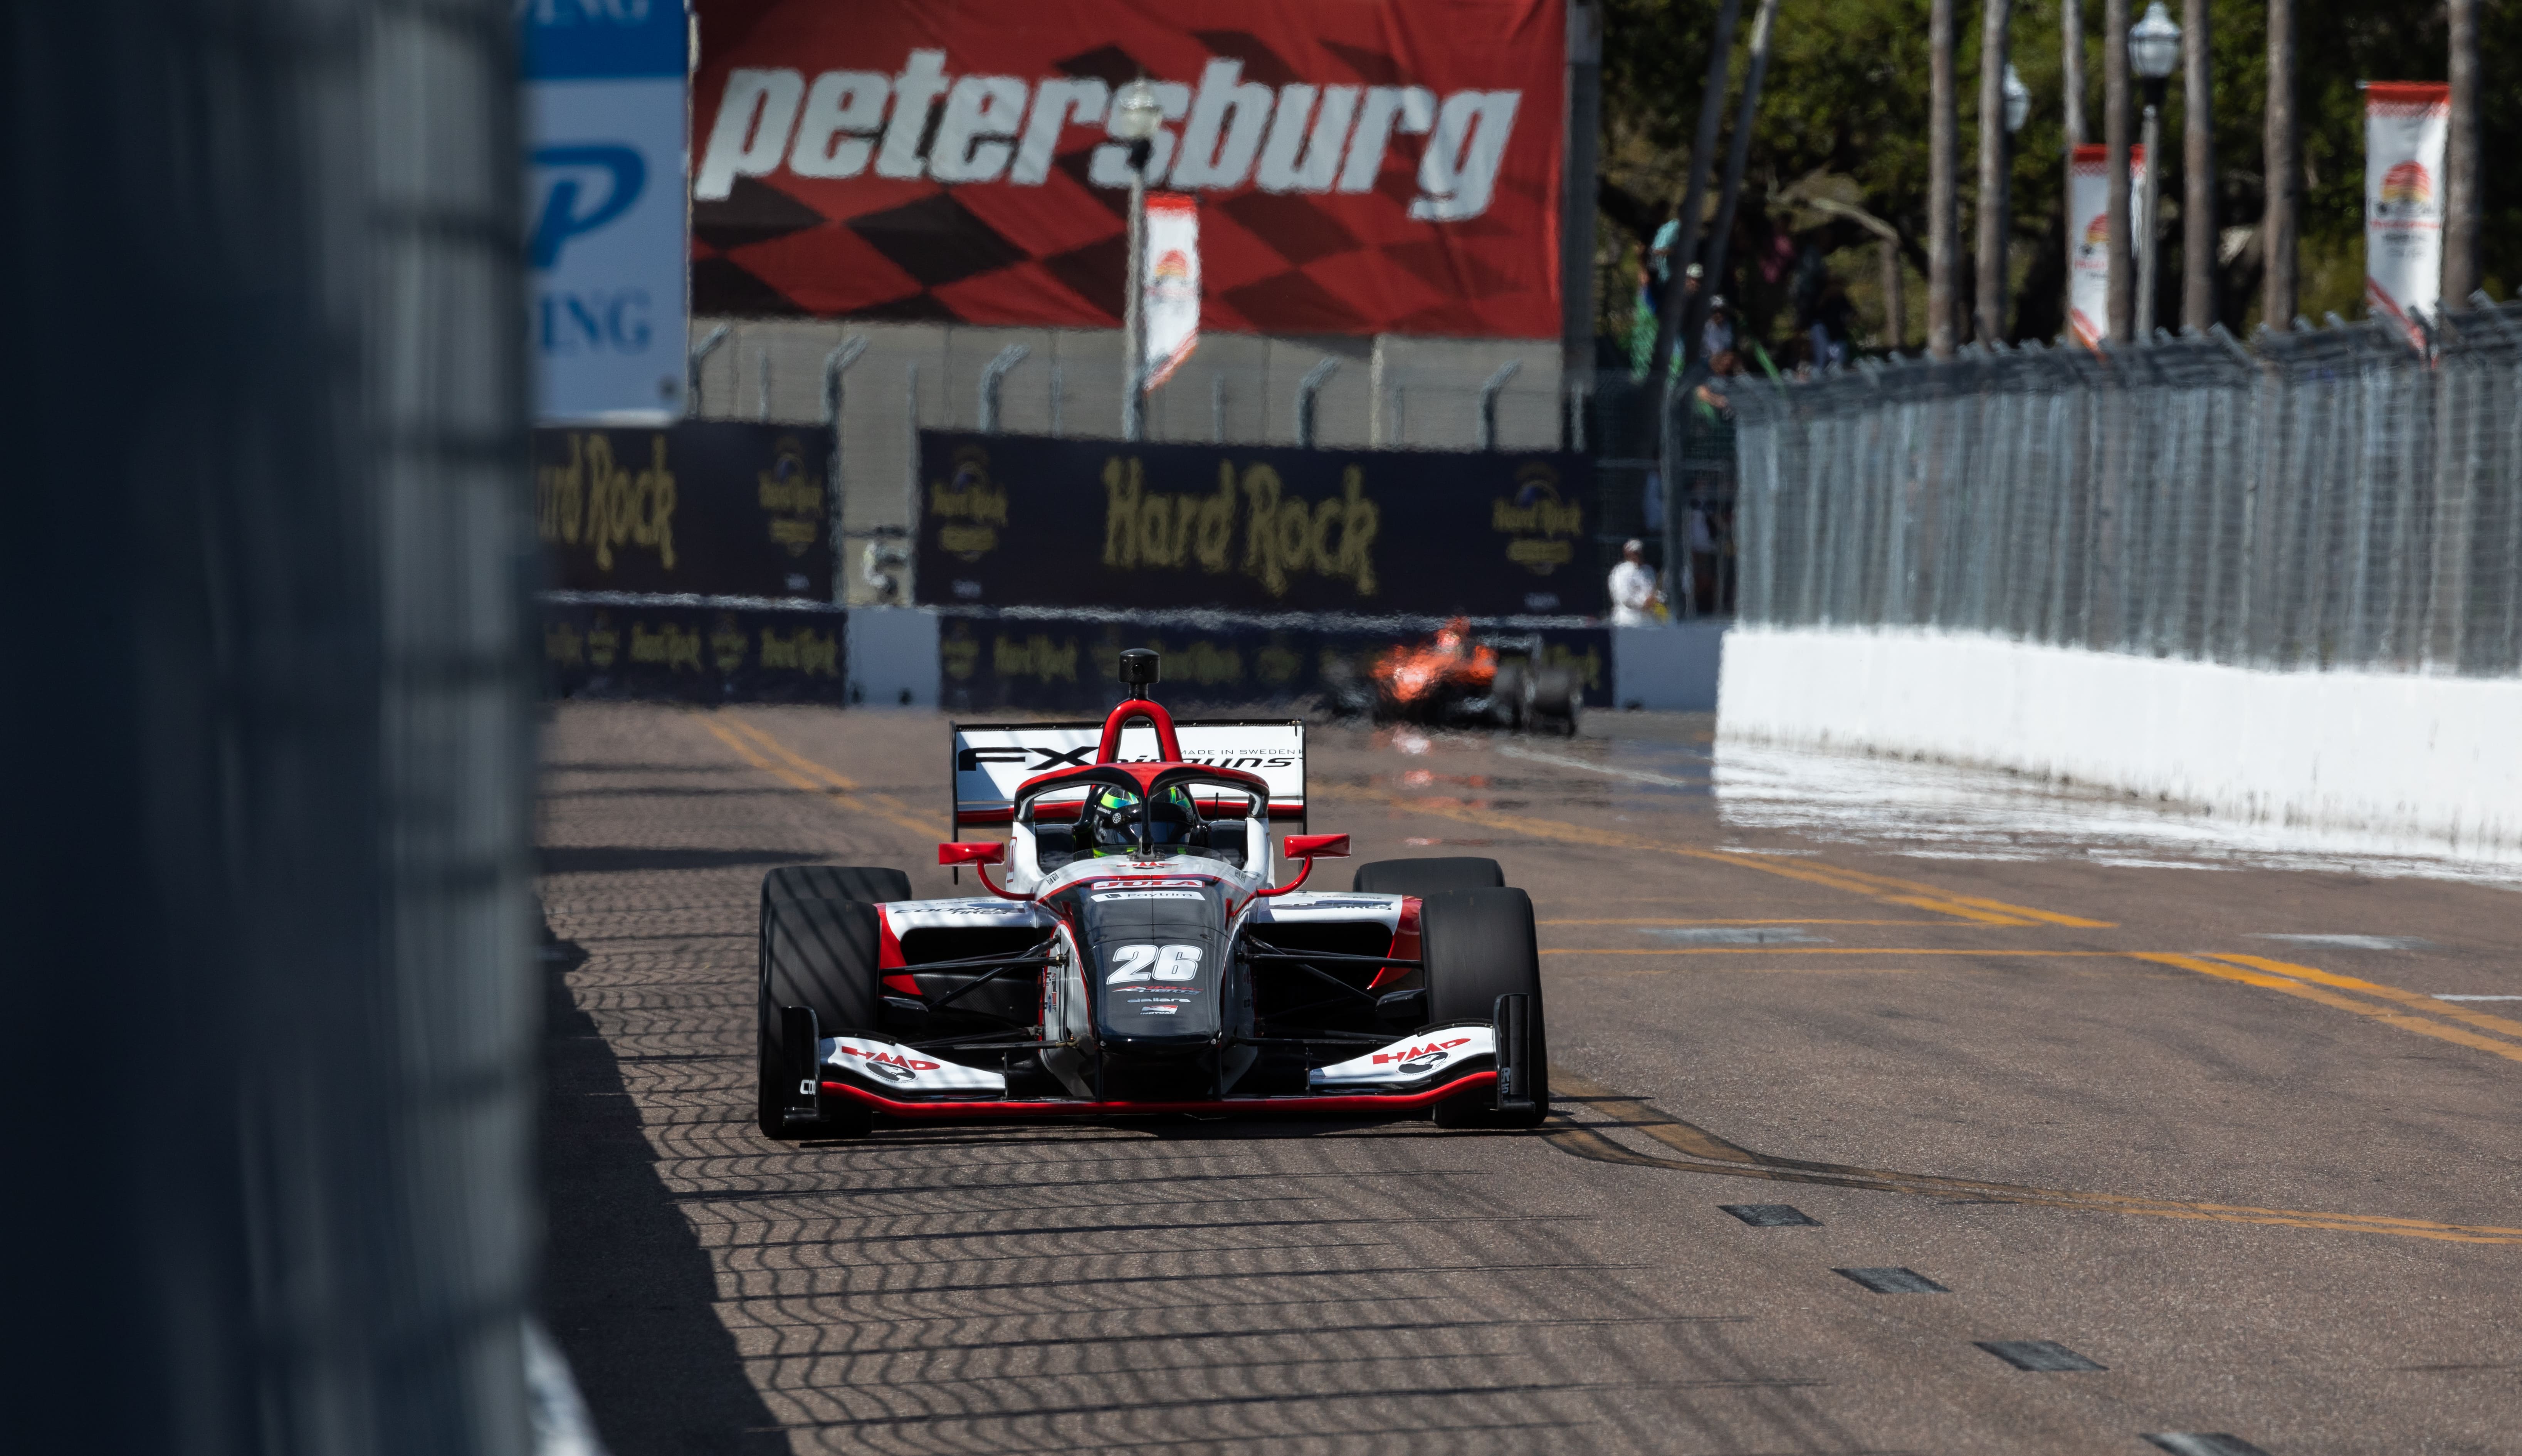 Road to Indy cars at the Firestone Grand Prix of St. Petersurg